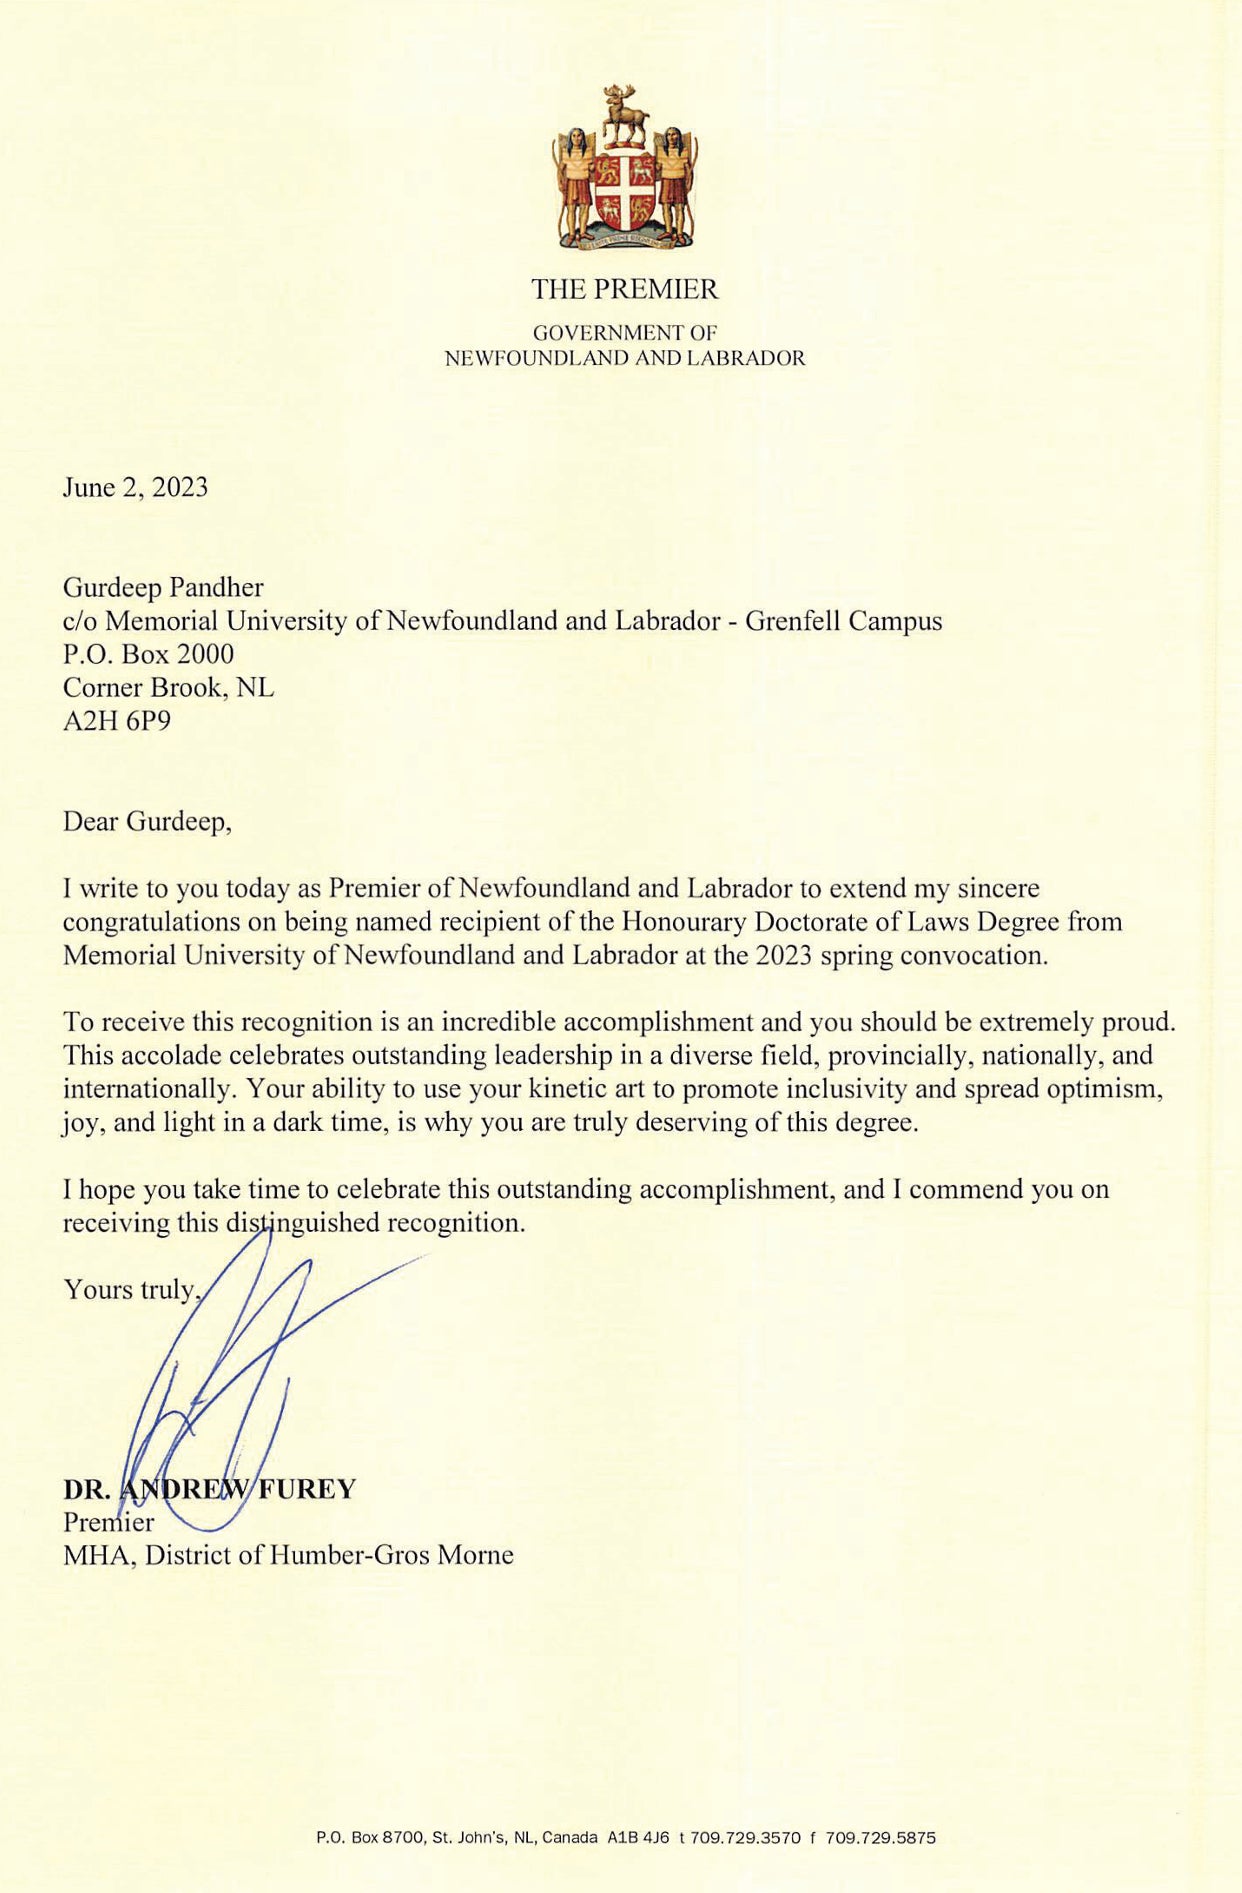 Letter from the Premier of Newfoundland and Labrador, Dr. Andrew Furey, to Gurdeep congratulating him on receiving an Honorary Doctorate of Laws Degree from Memorial University of Newfoundland and Labrador at the 2023 spring convocation.